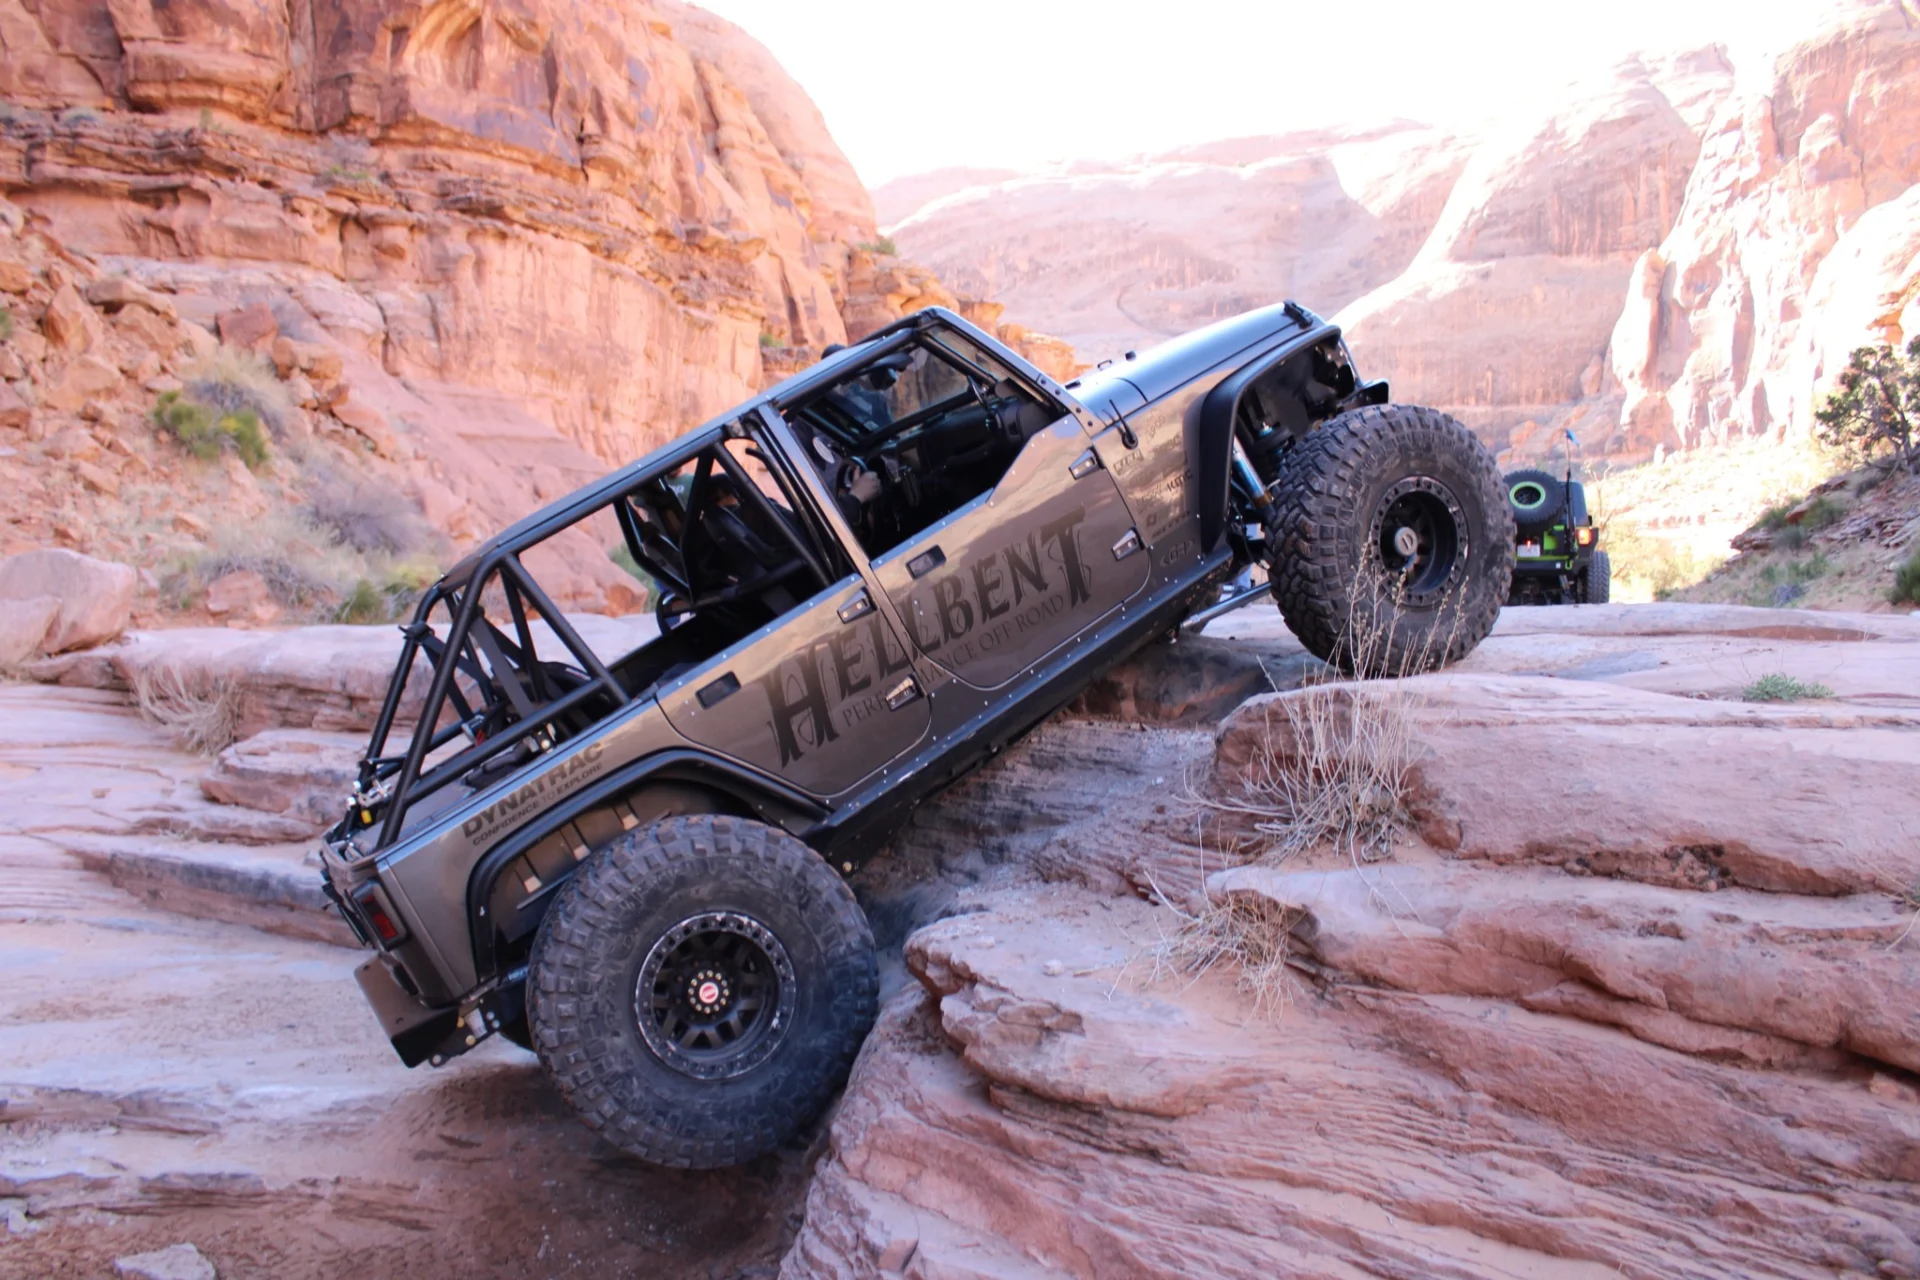 A jeep is driving over some rocks on the side of a mountain.